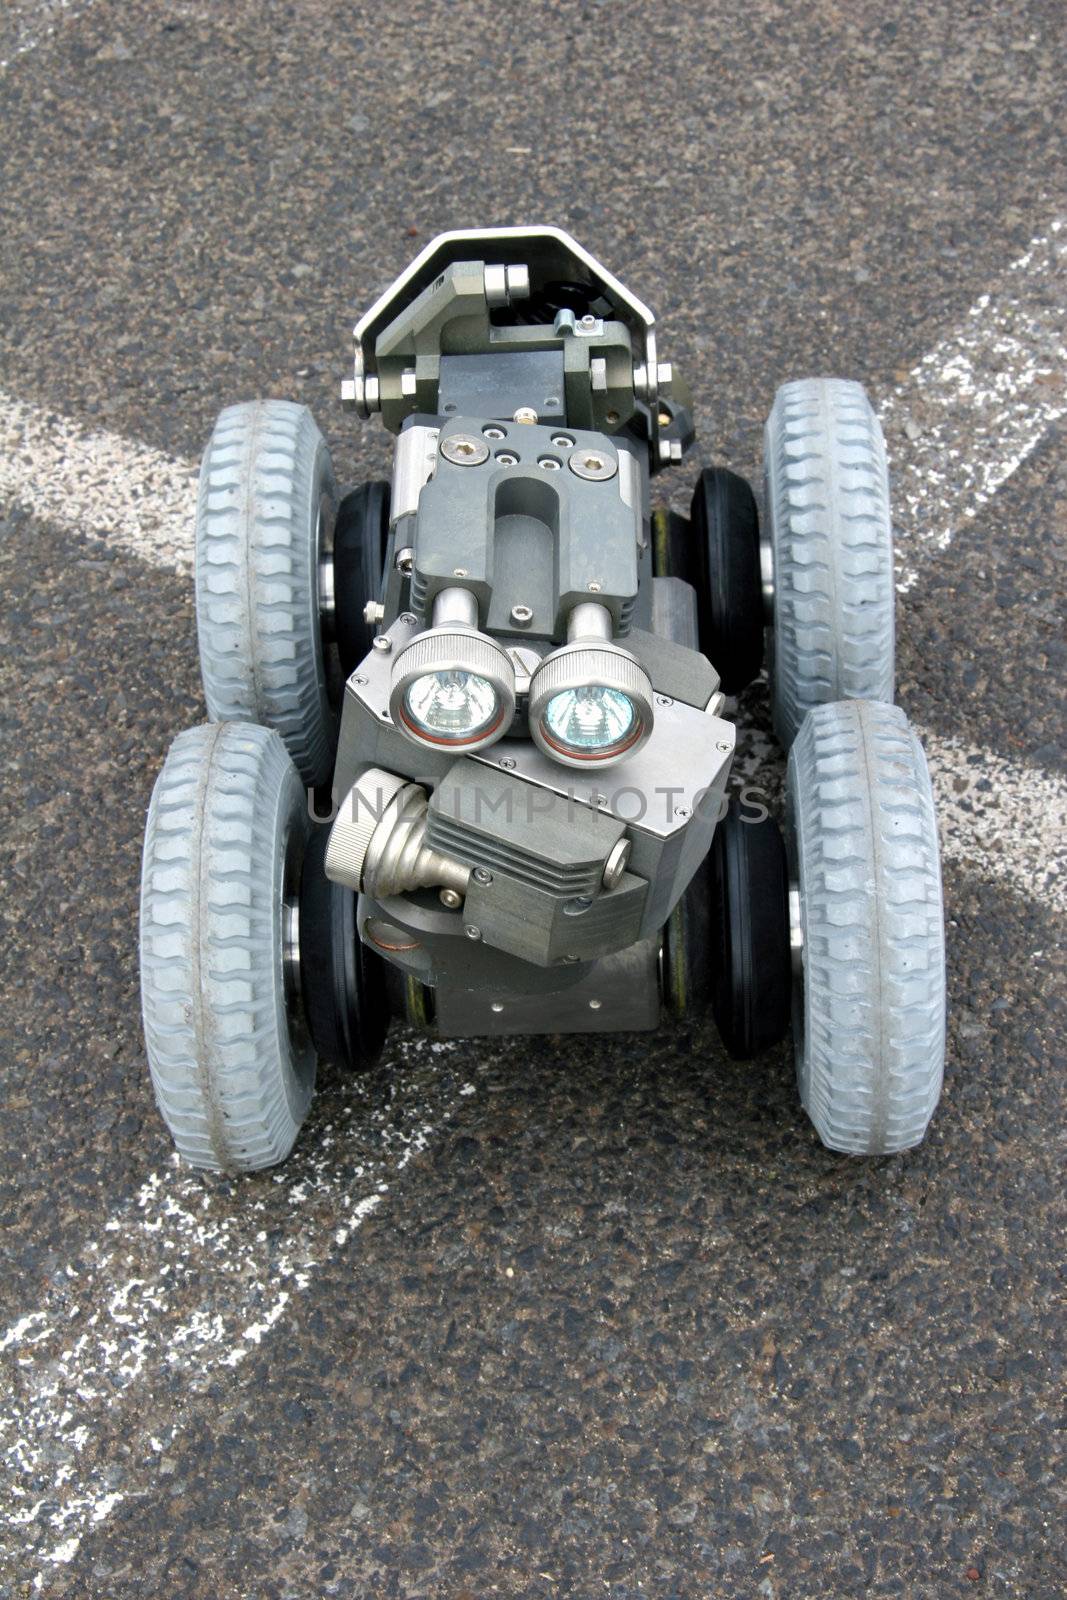 Industrial robot on the ground